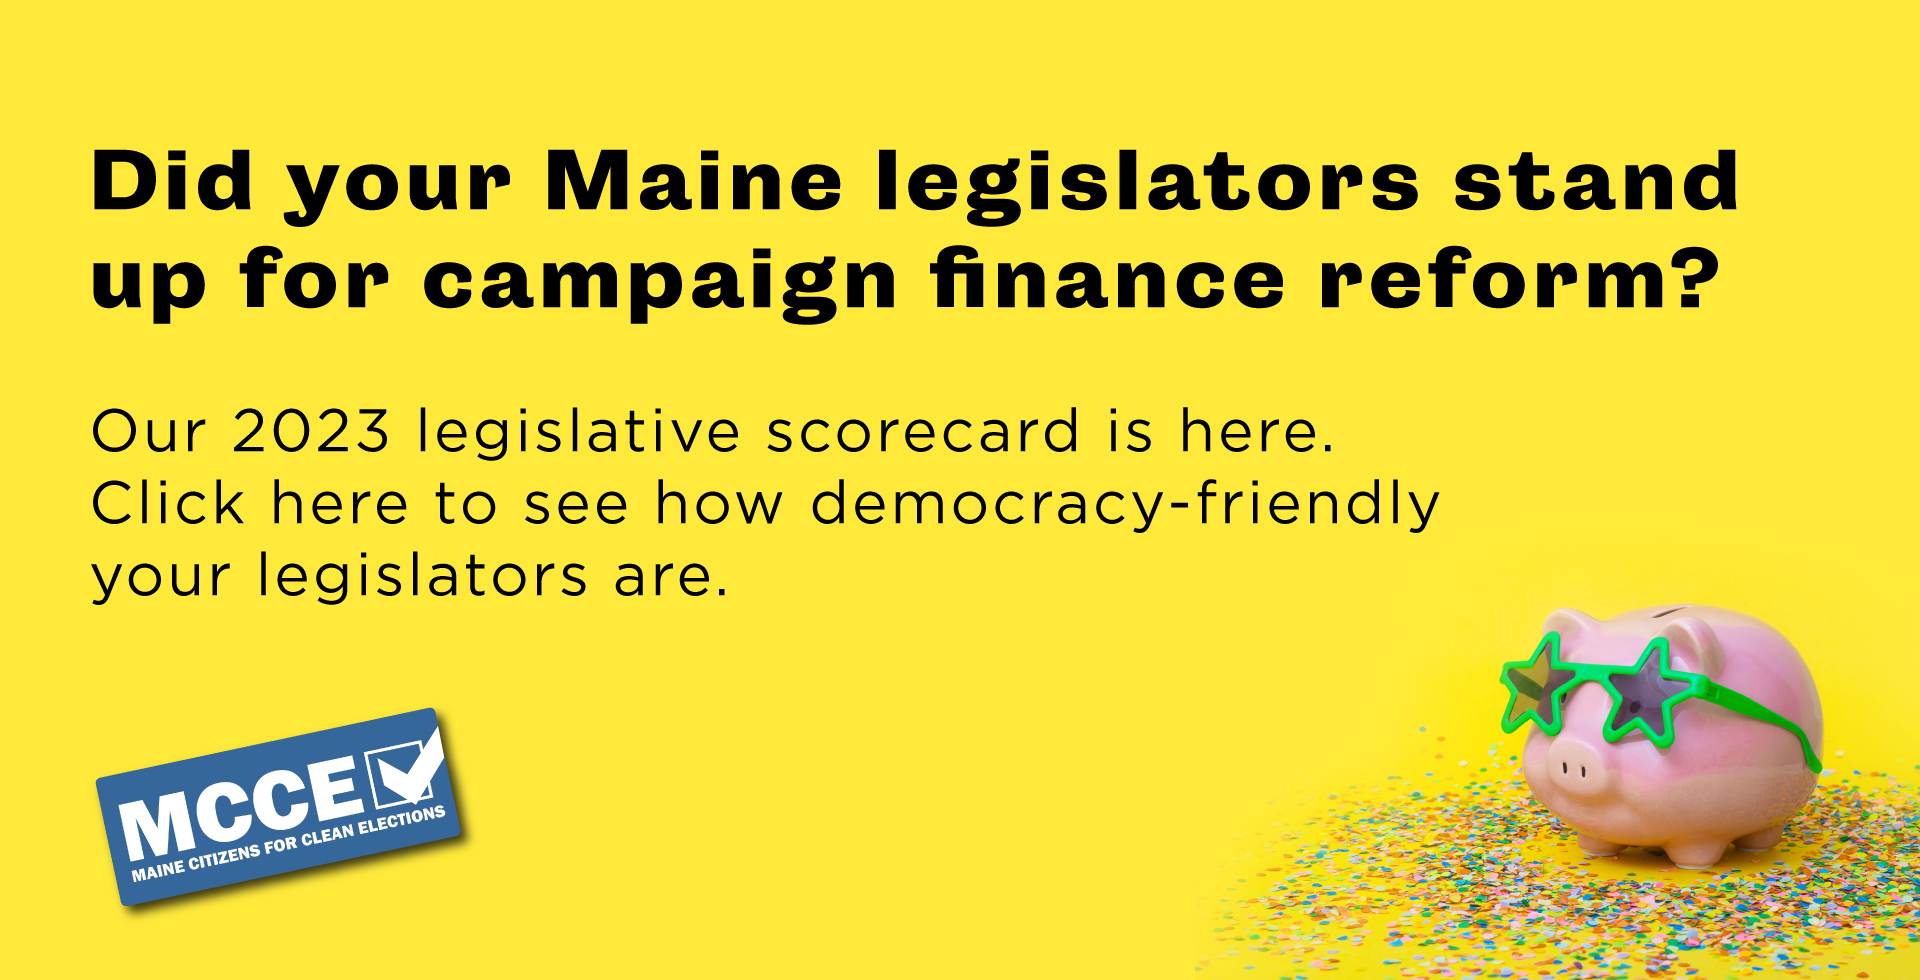 Our 2023 Legislative Scorecard is here. Click here to see how democracy-friendly your legislators are!